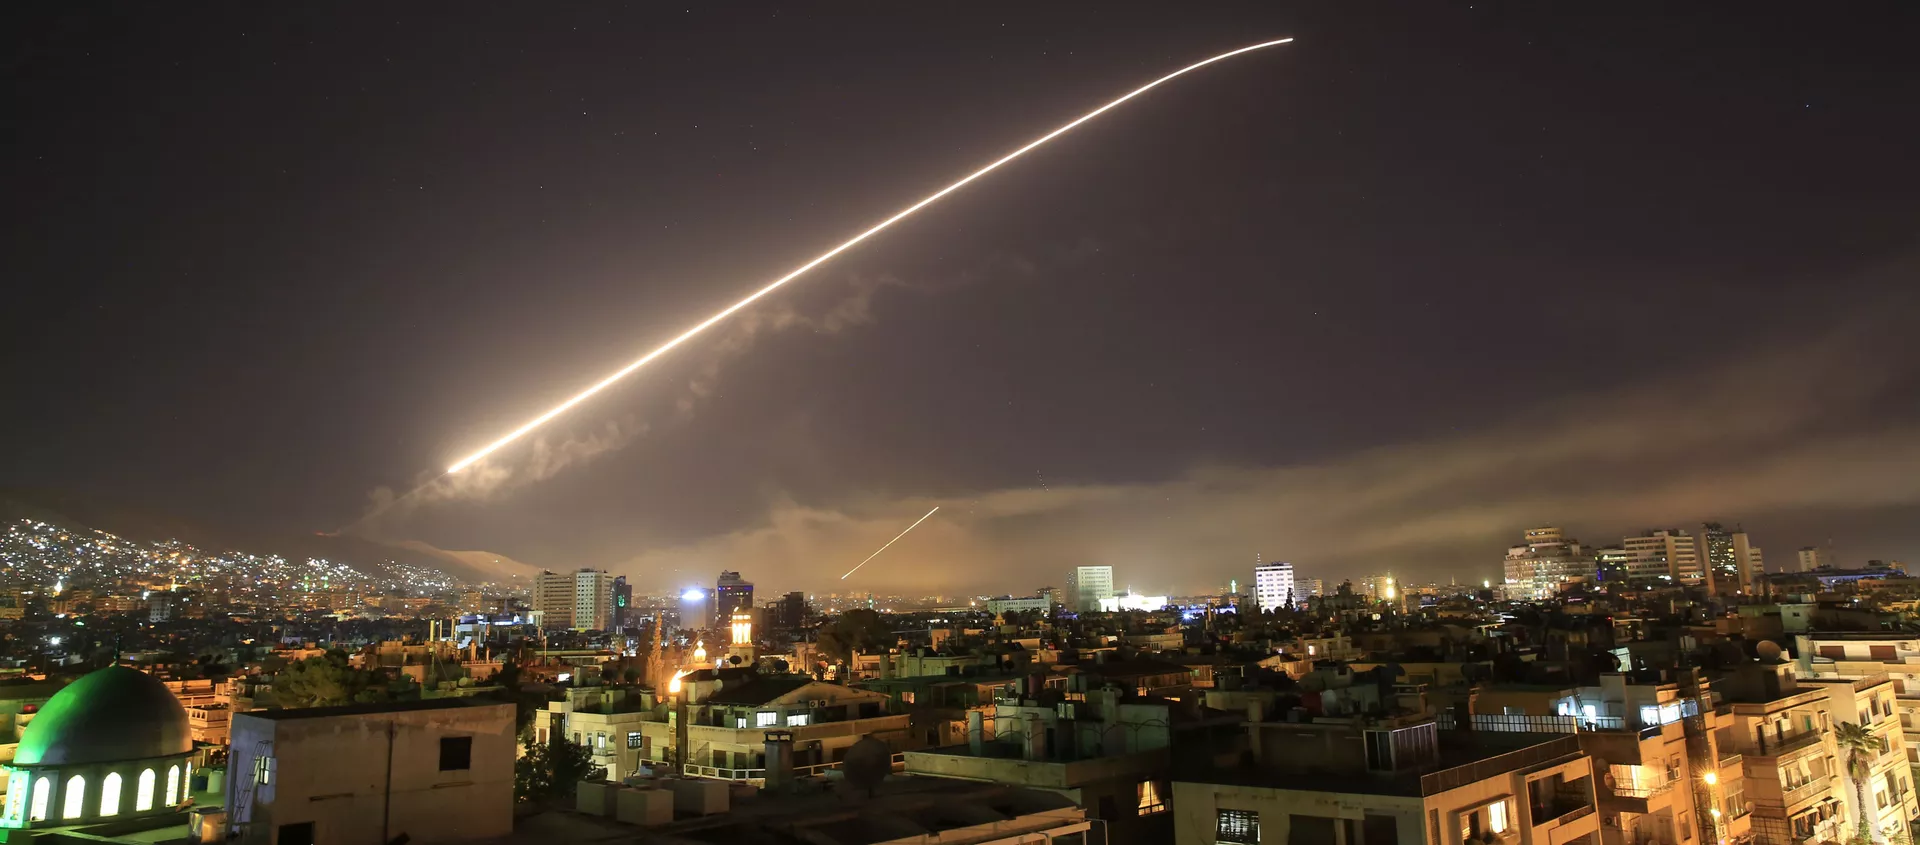 The Damascus sky lights up missile fire as the U.S. launches an attack on Syria targeting different parts of the capital early Saturday, April 14, 2018 - Sputnik International, 1920, 14.04.2018